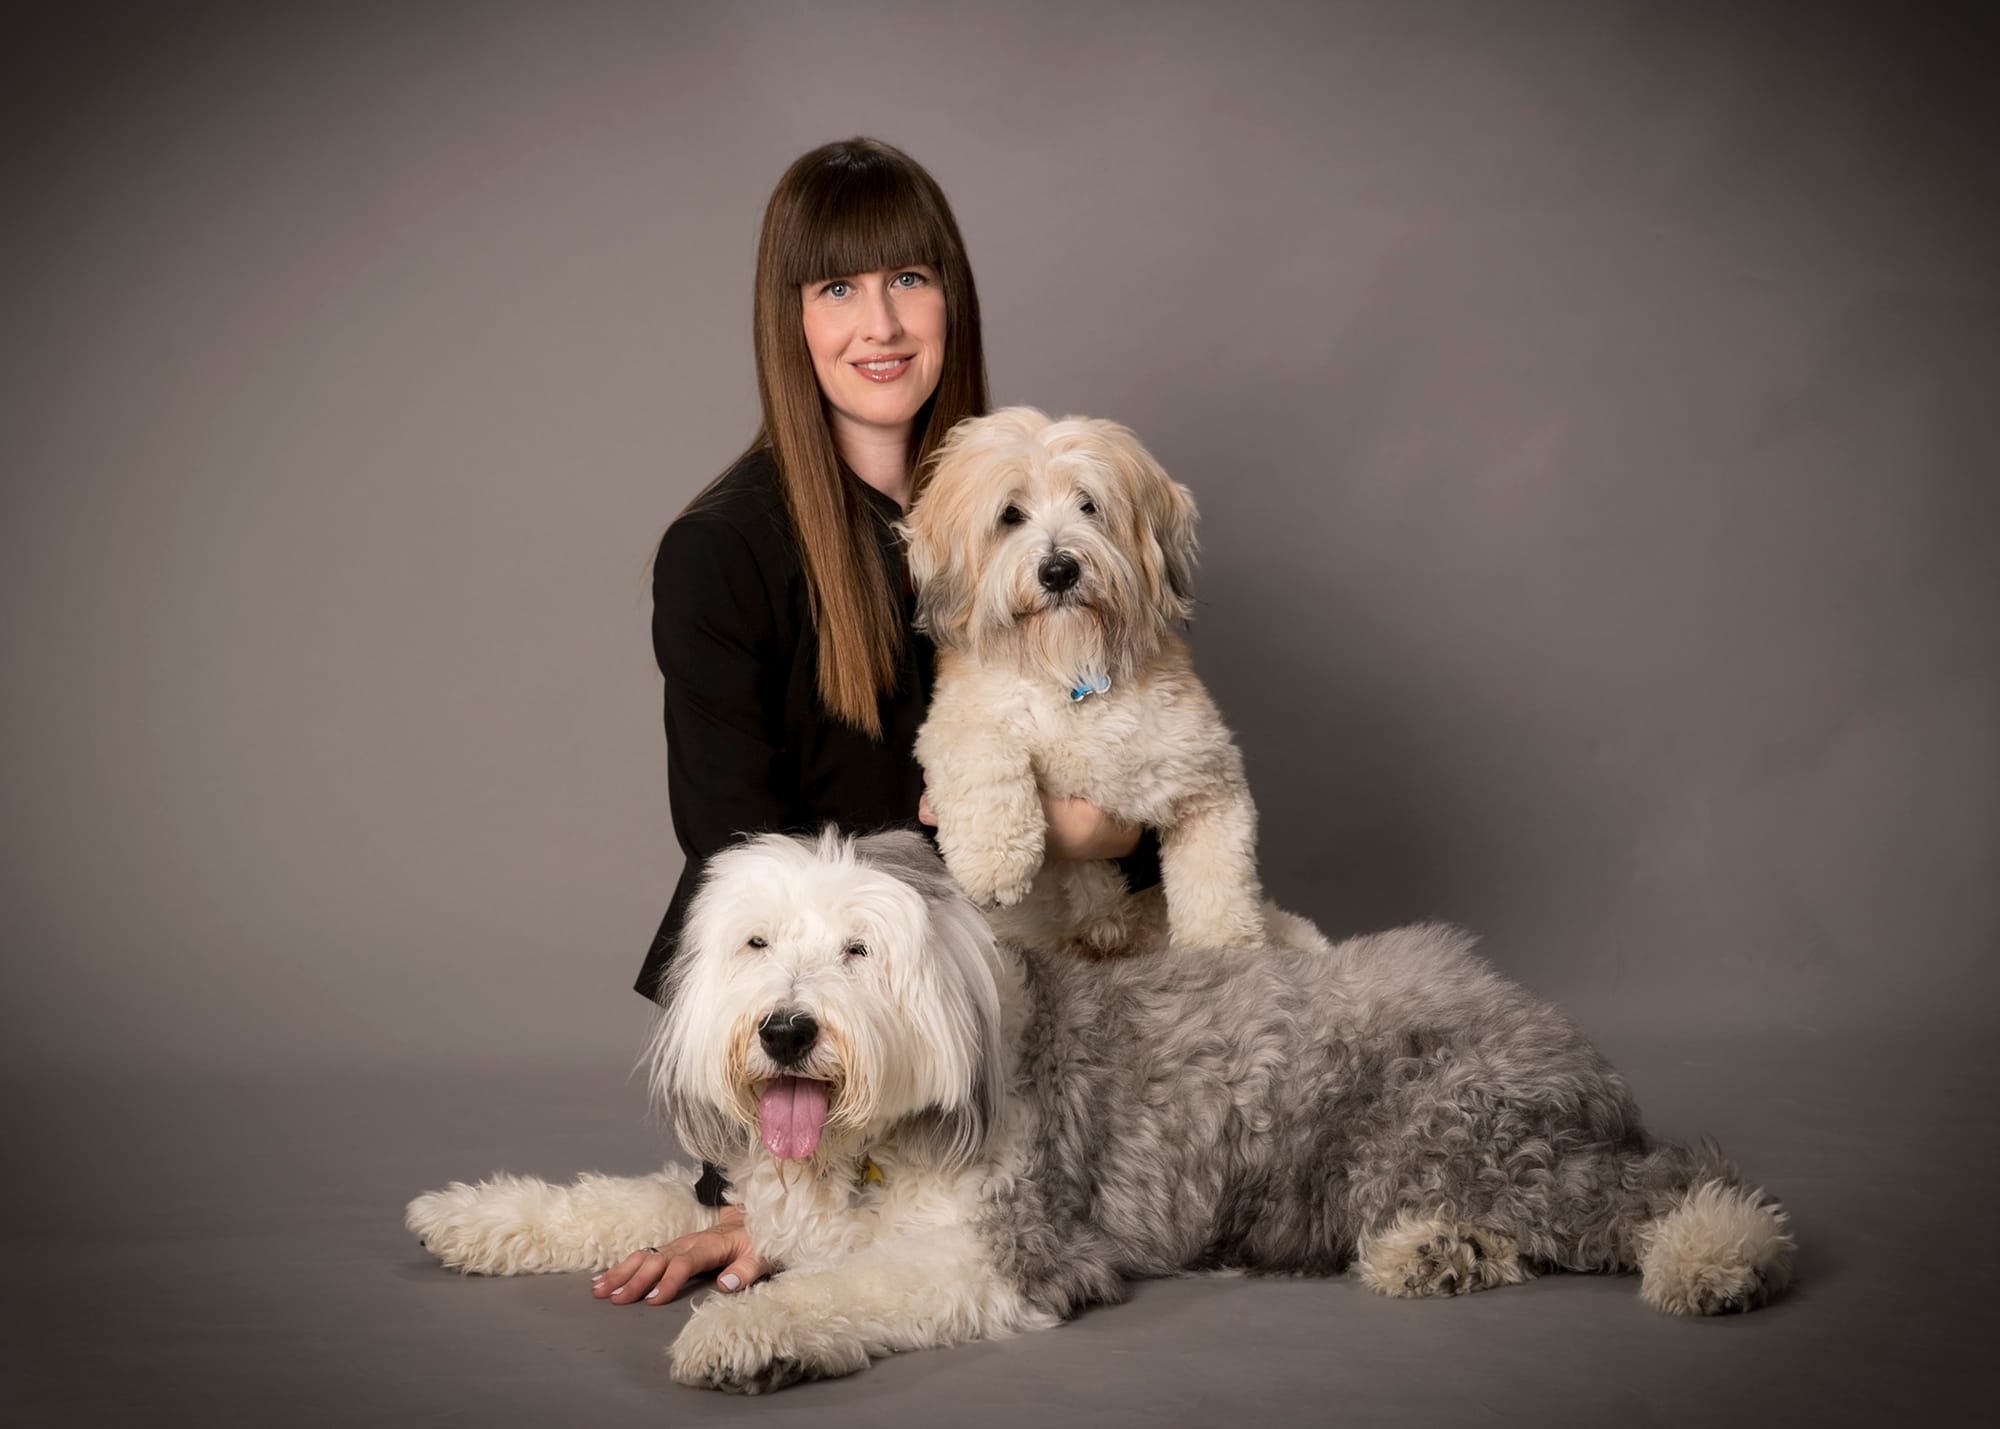 Jennifer Friedman Launches Animal Law Practice, Financial Post/Legal Post, 2016